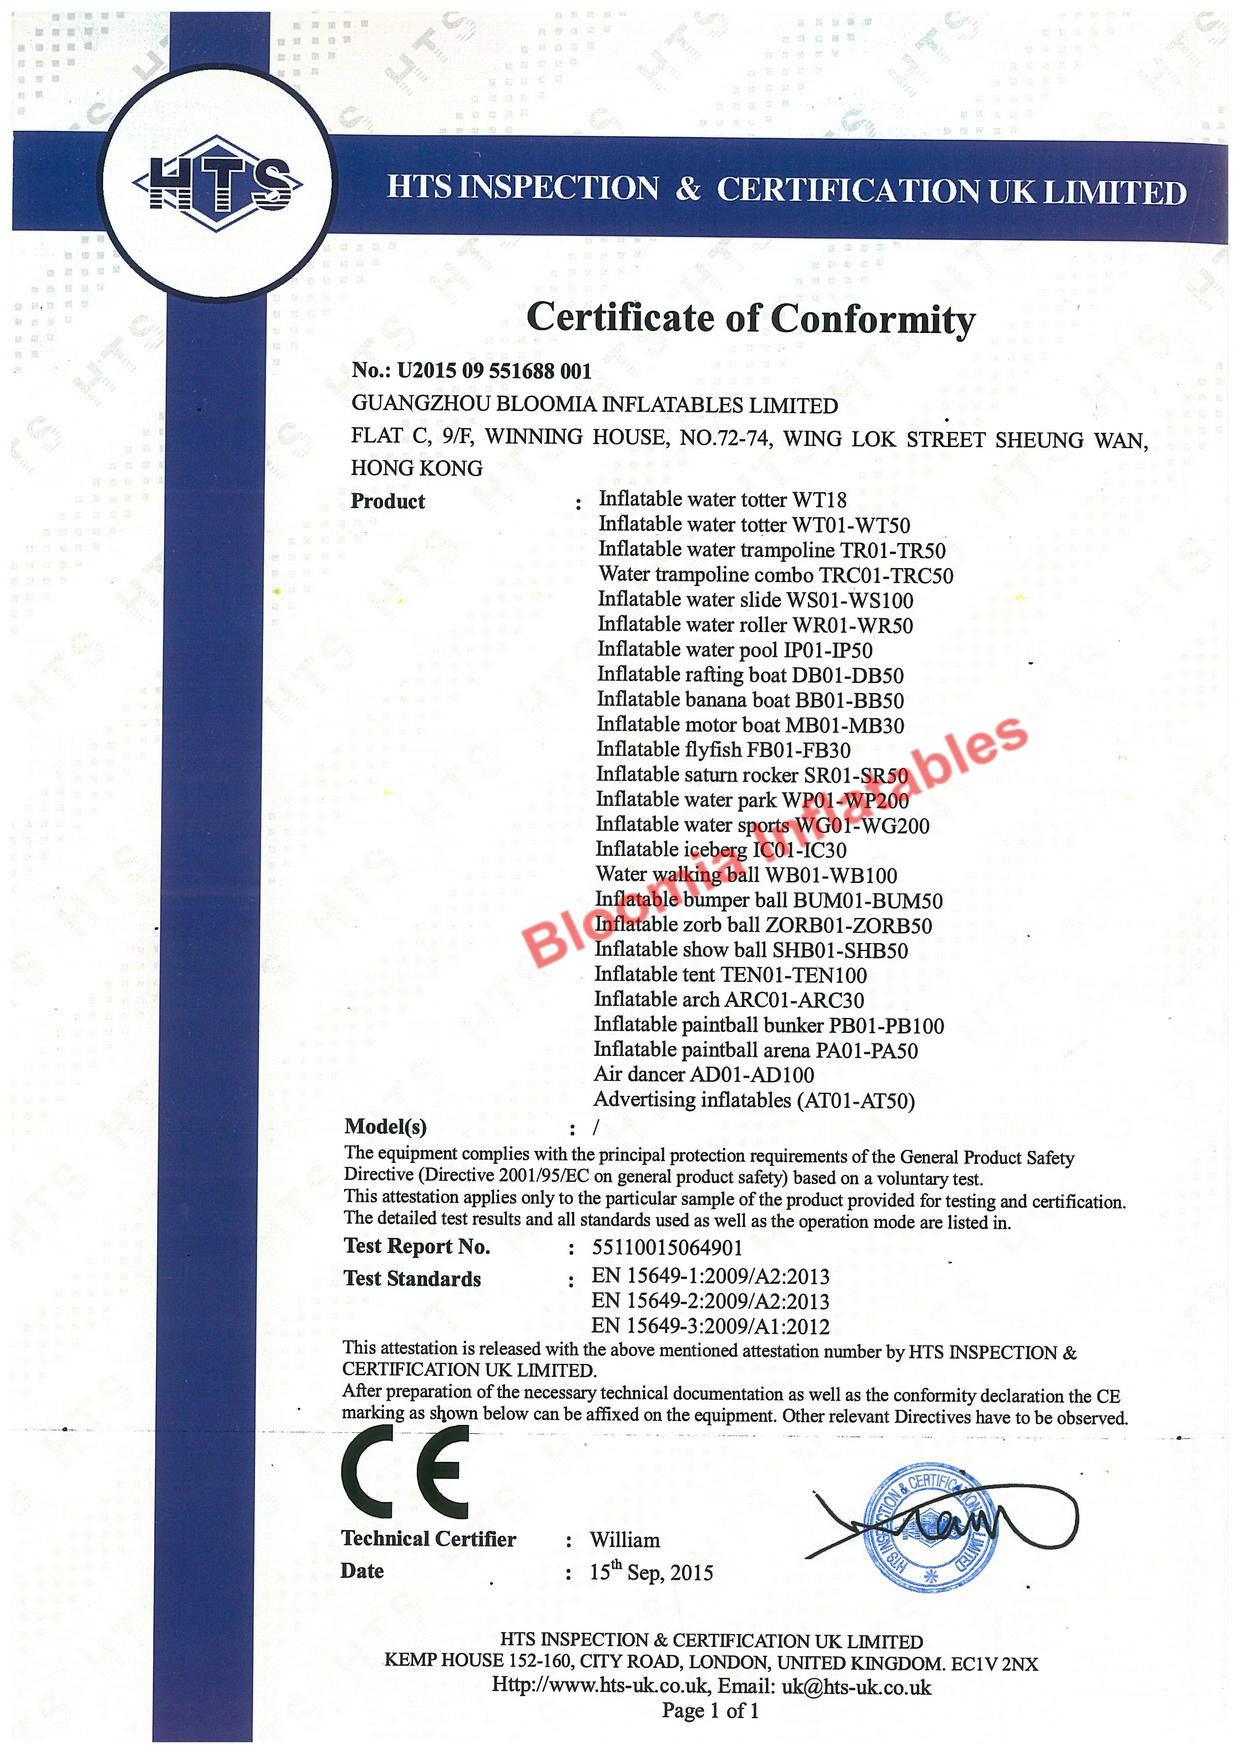 Guangzhou Bloomia Inflatables Factory Certifications